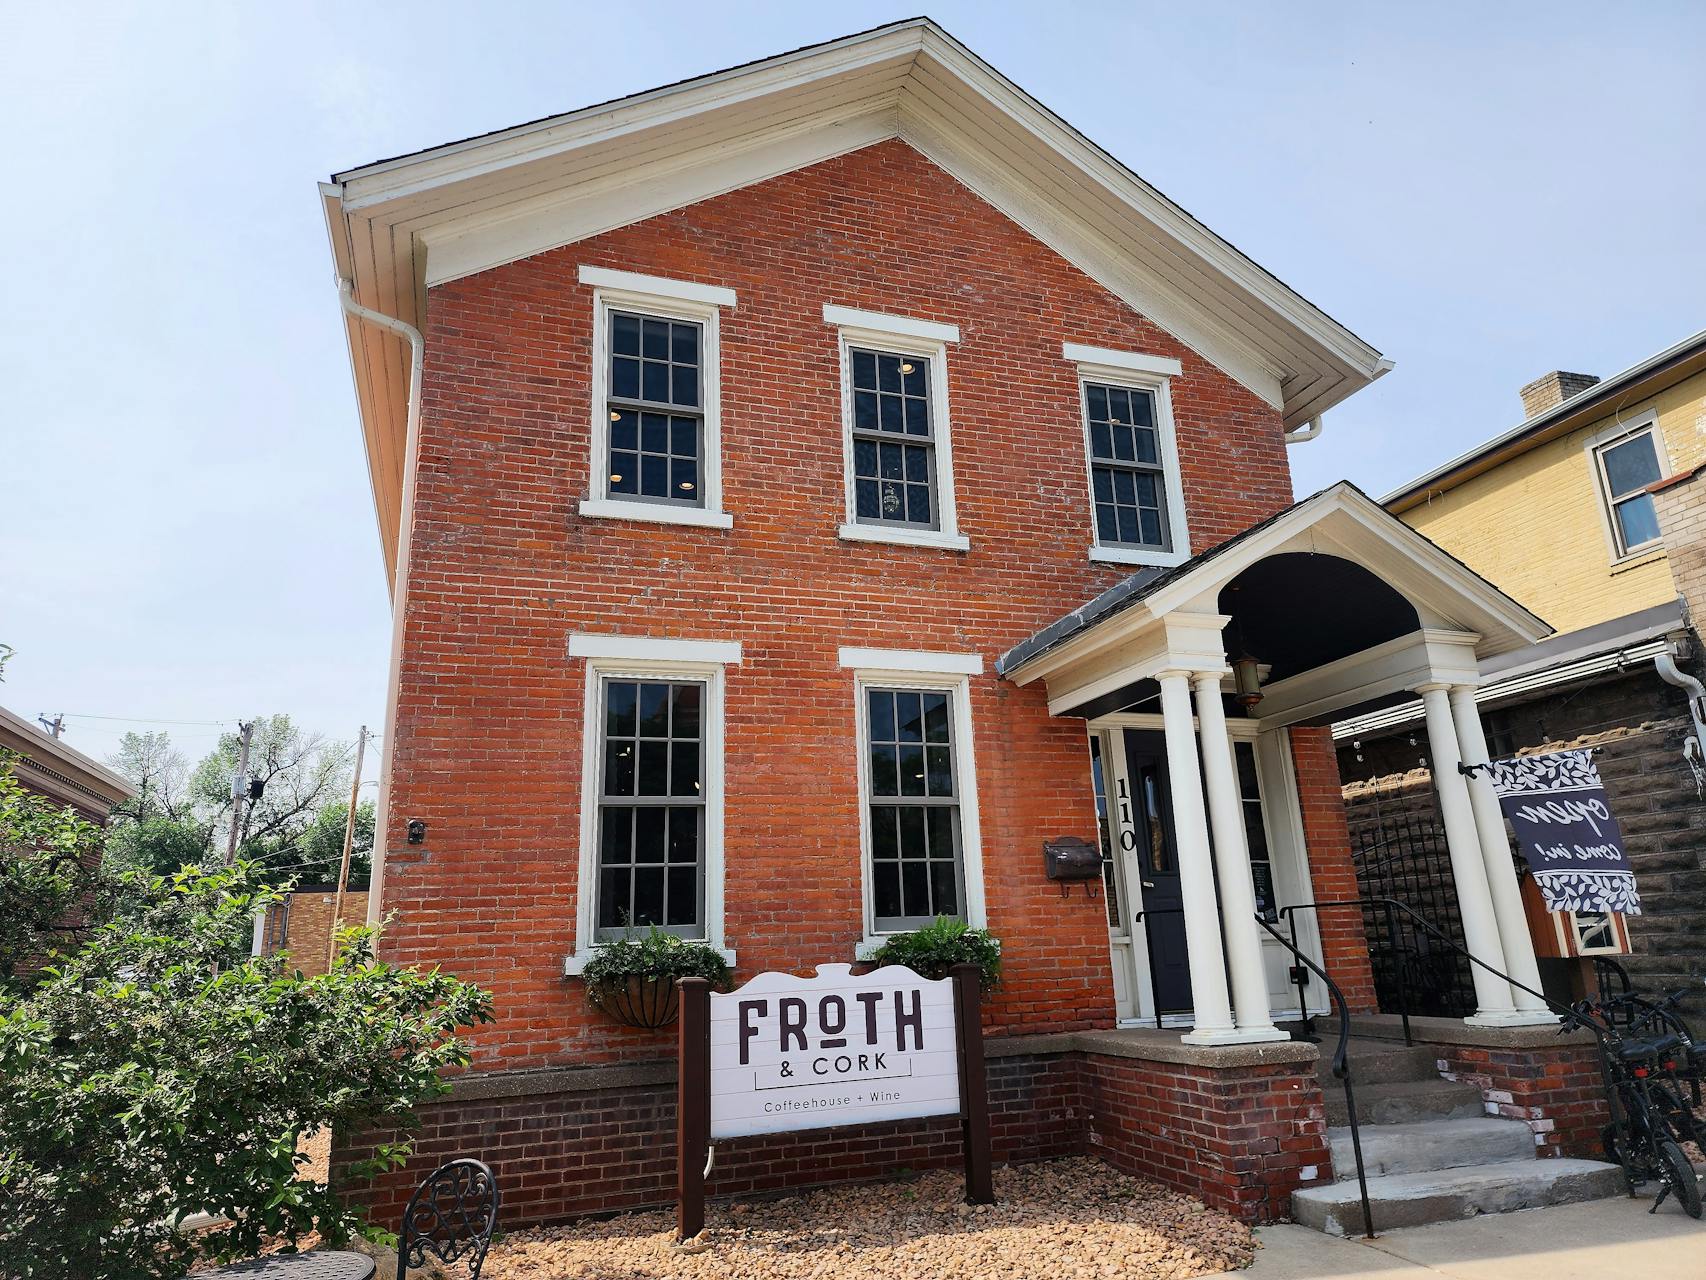 Froth & Cork serves up coffee flights and wine in a historic Hastings building.